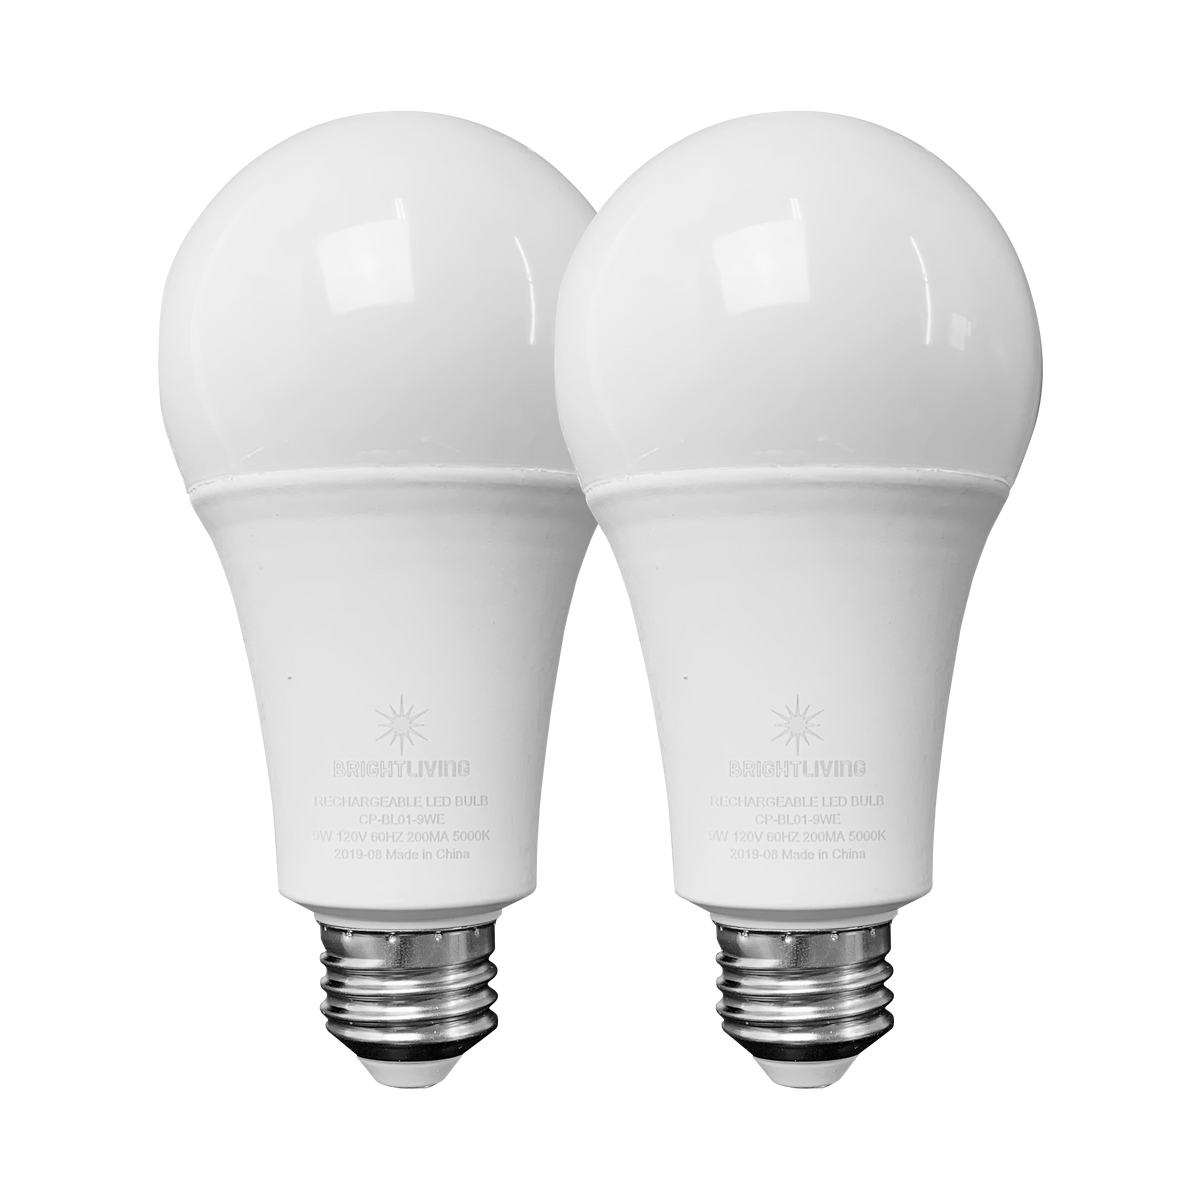 Rechargeable LED Bulb: The Way to a Brighter Future